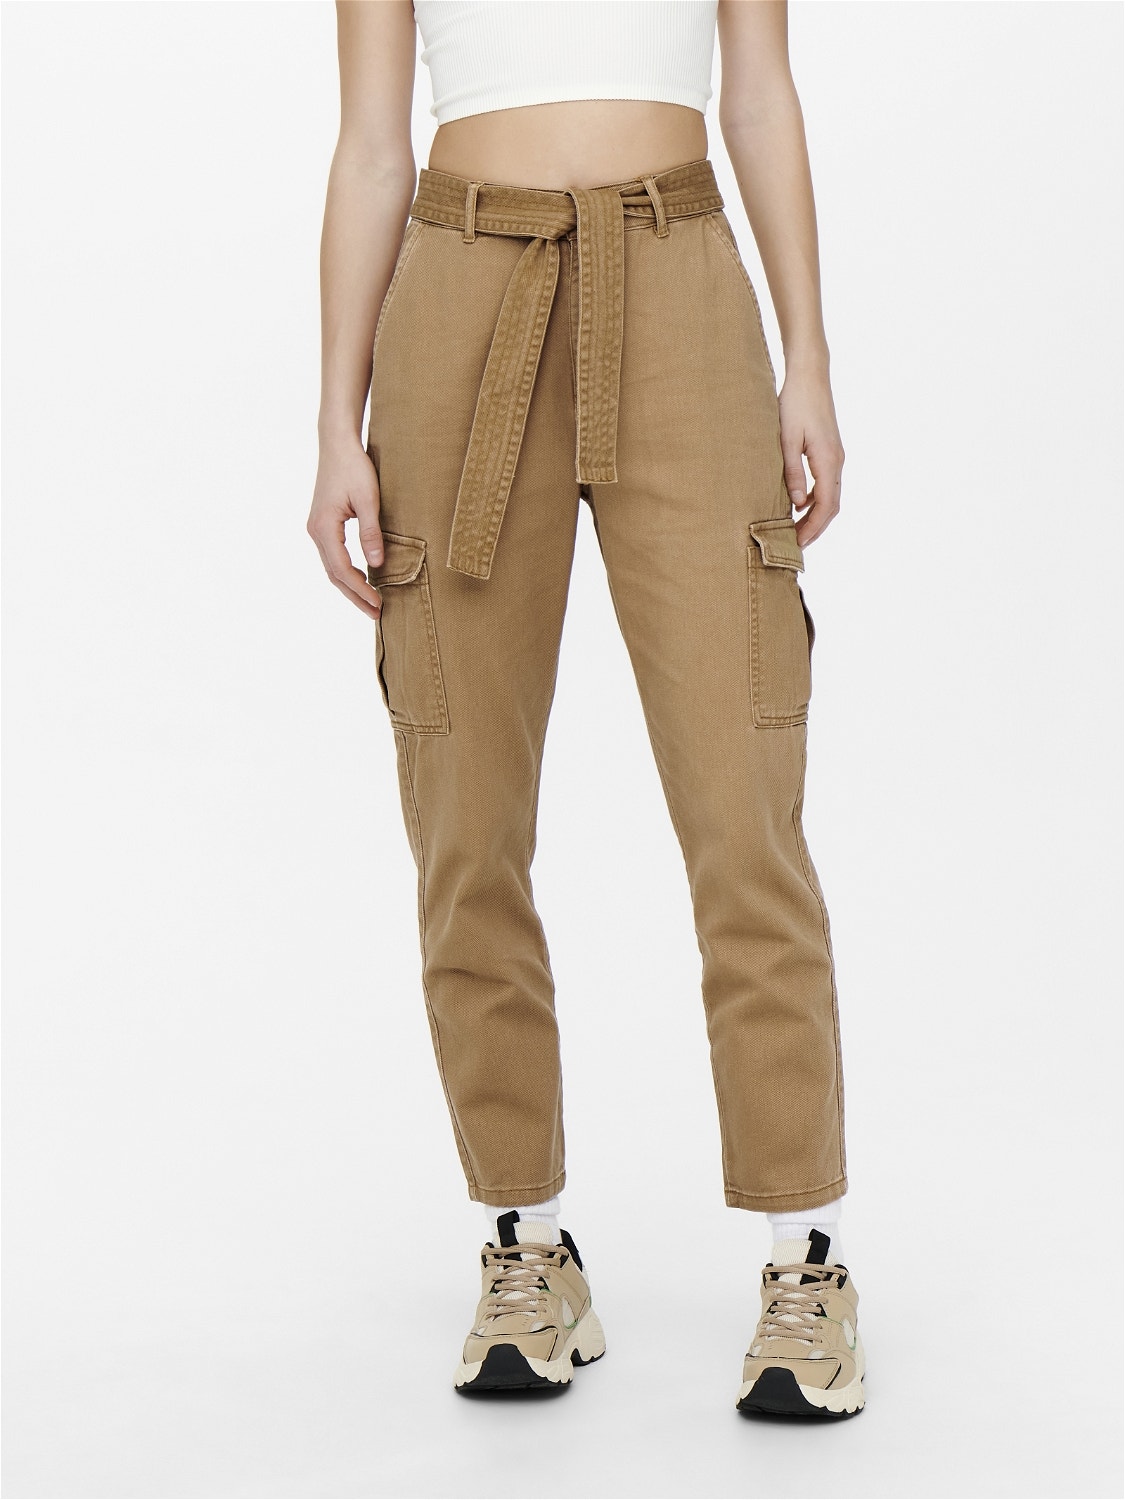 Cargo Fit High waist Trousers with 50% discount!